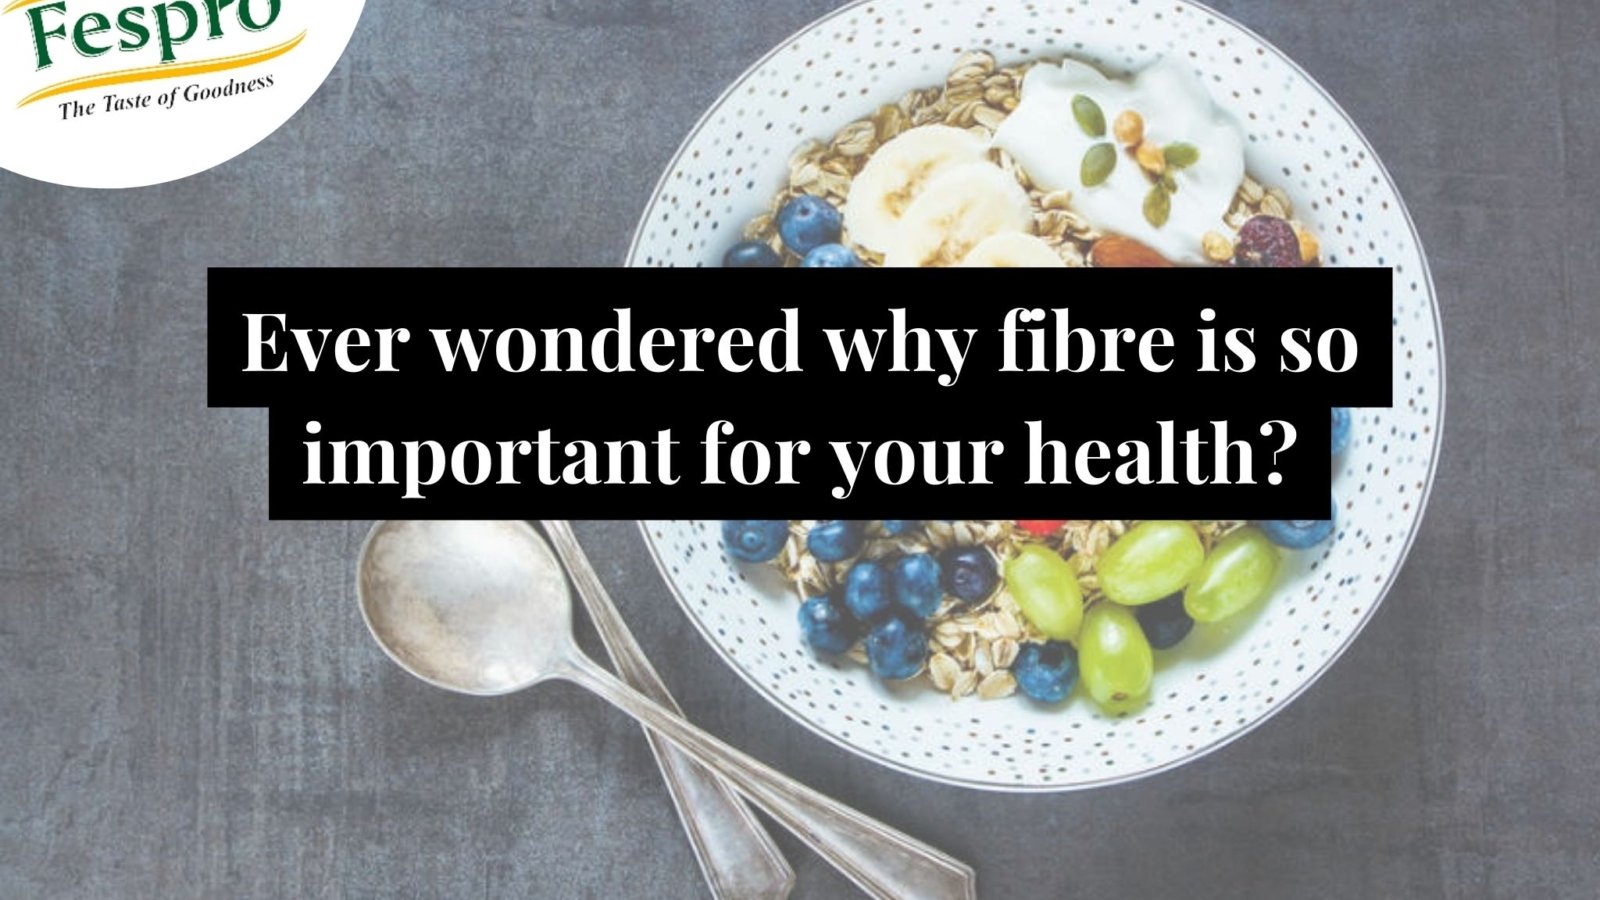 Ever wondered why fibre is so important for your health?